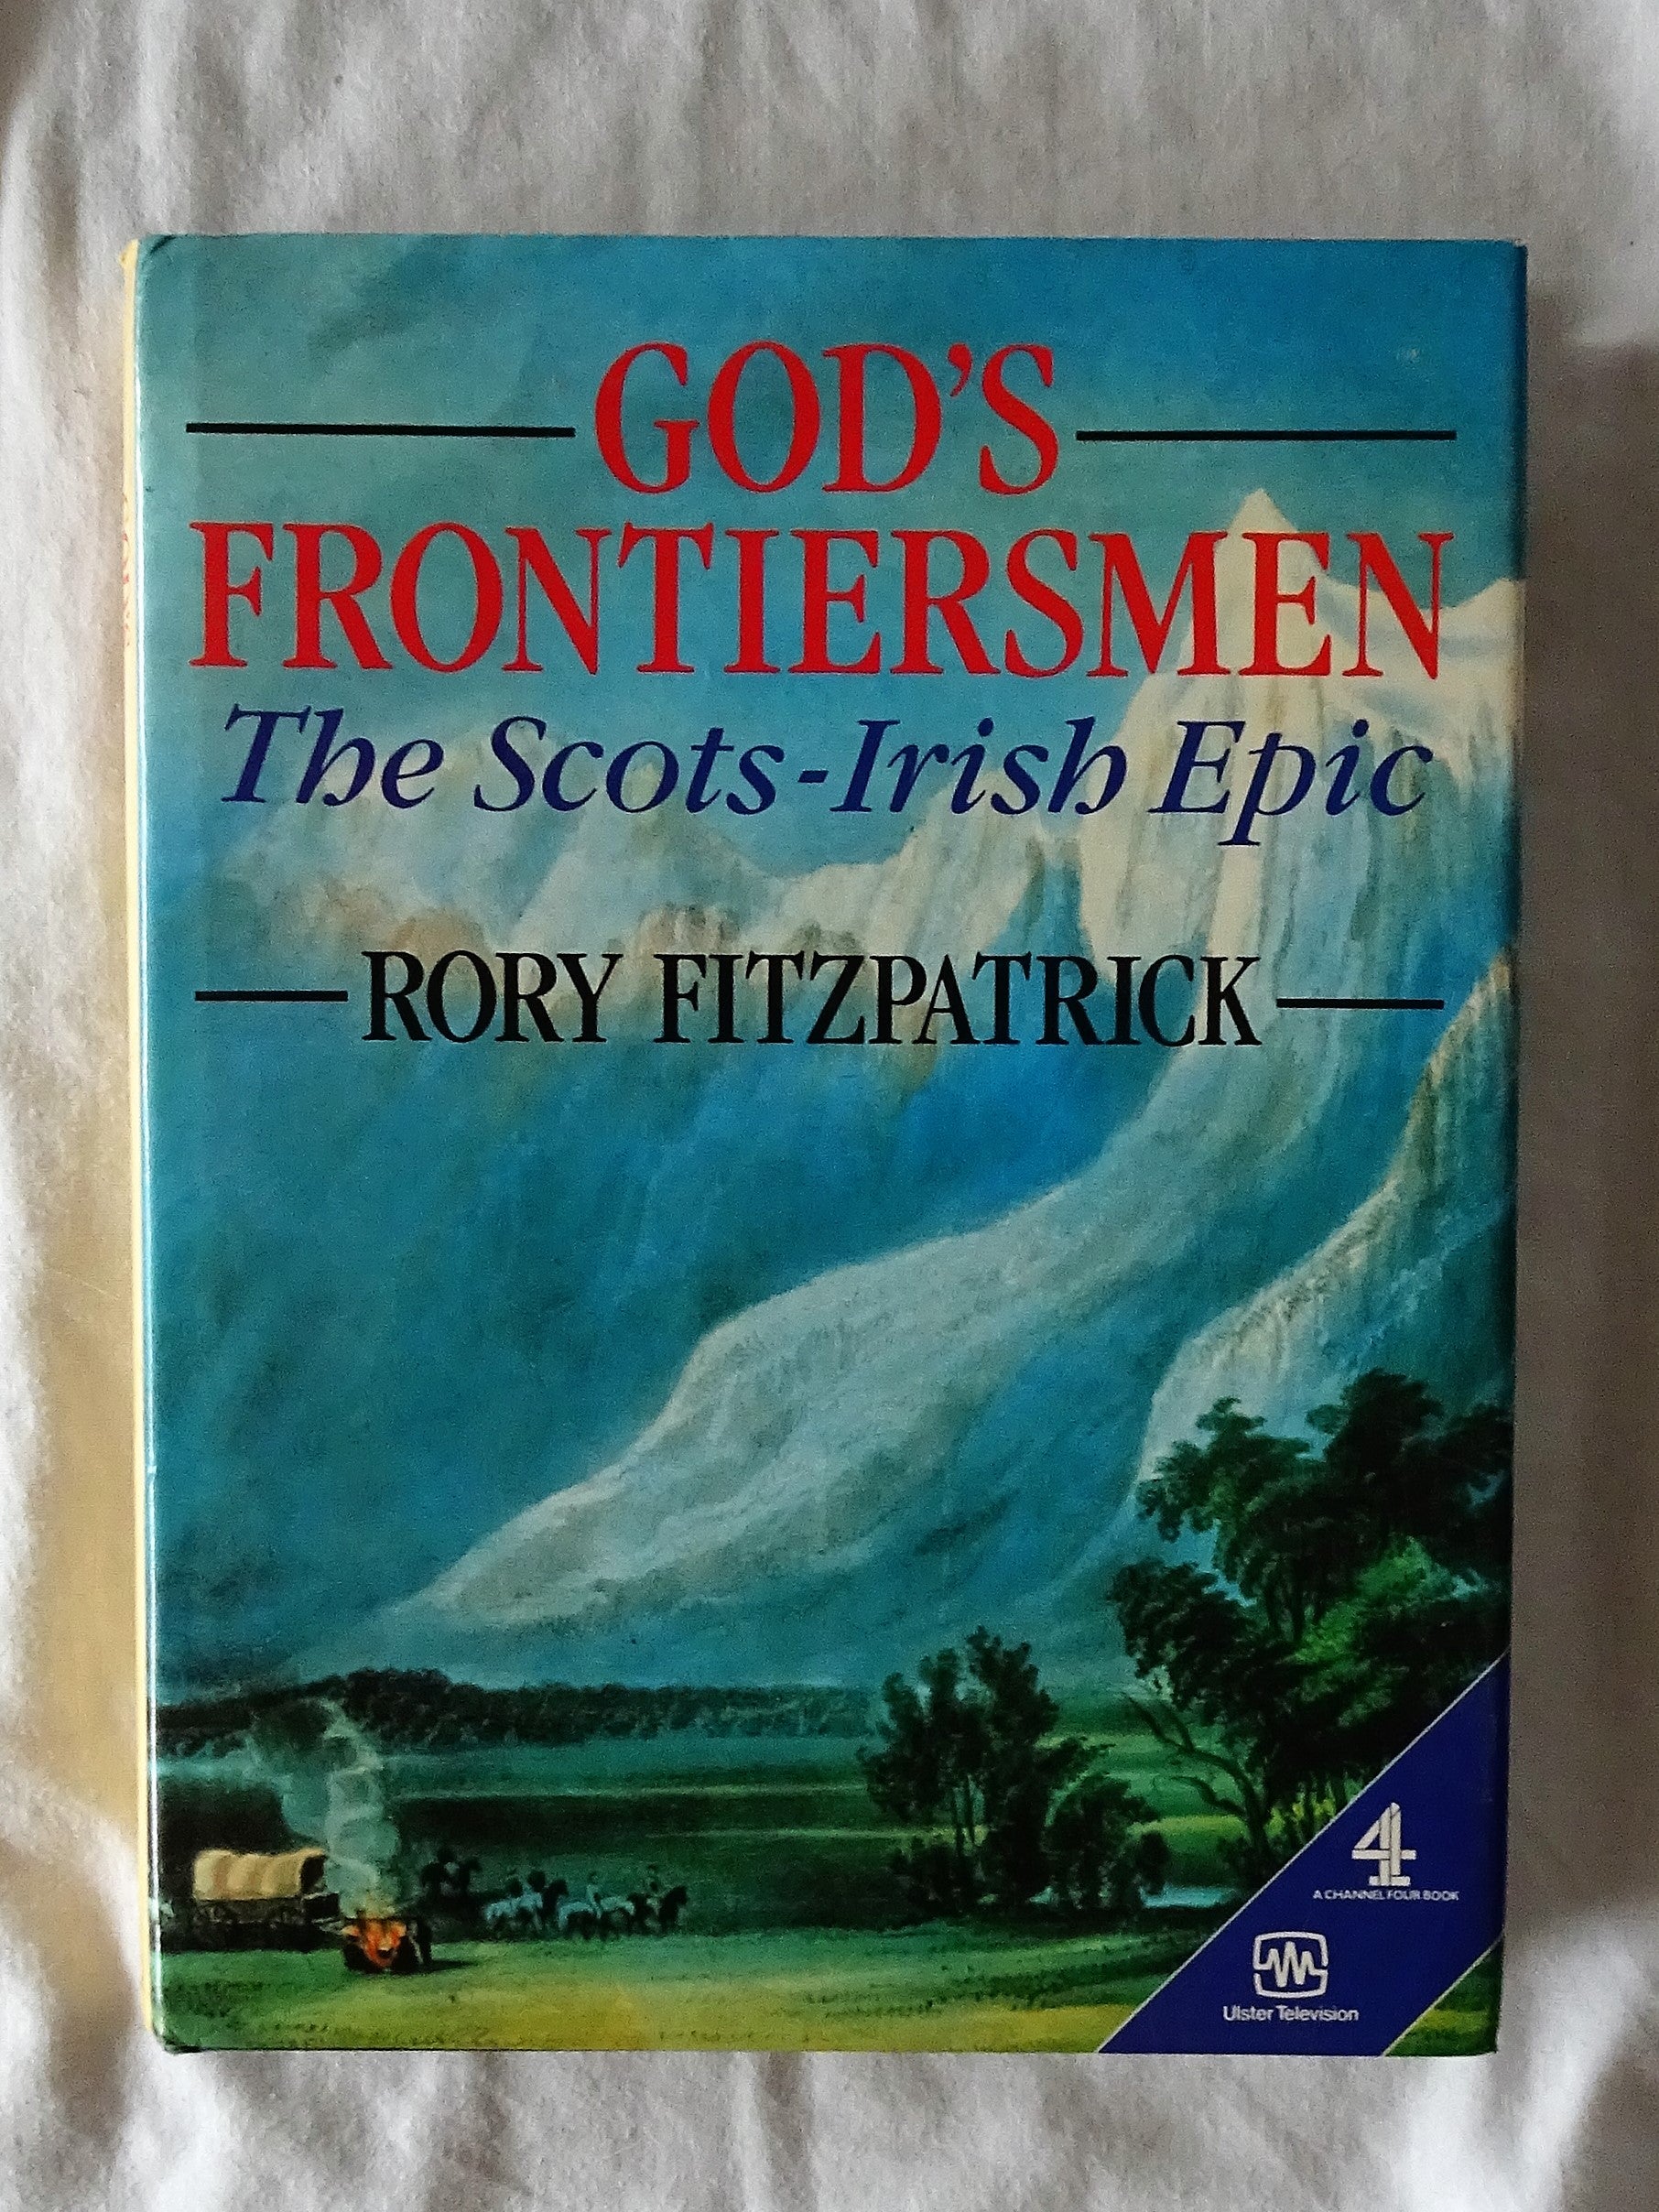 God's Frontiersmen  The Scots-Irish Epic  by Rory Fitzpatrick